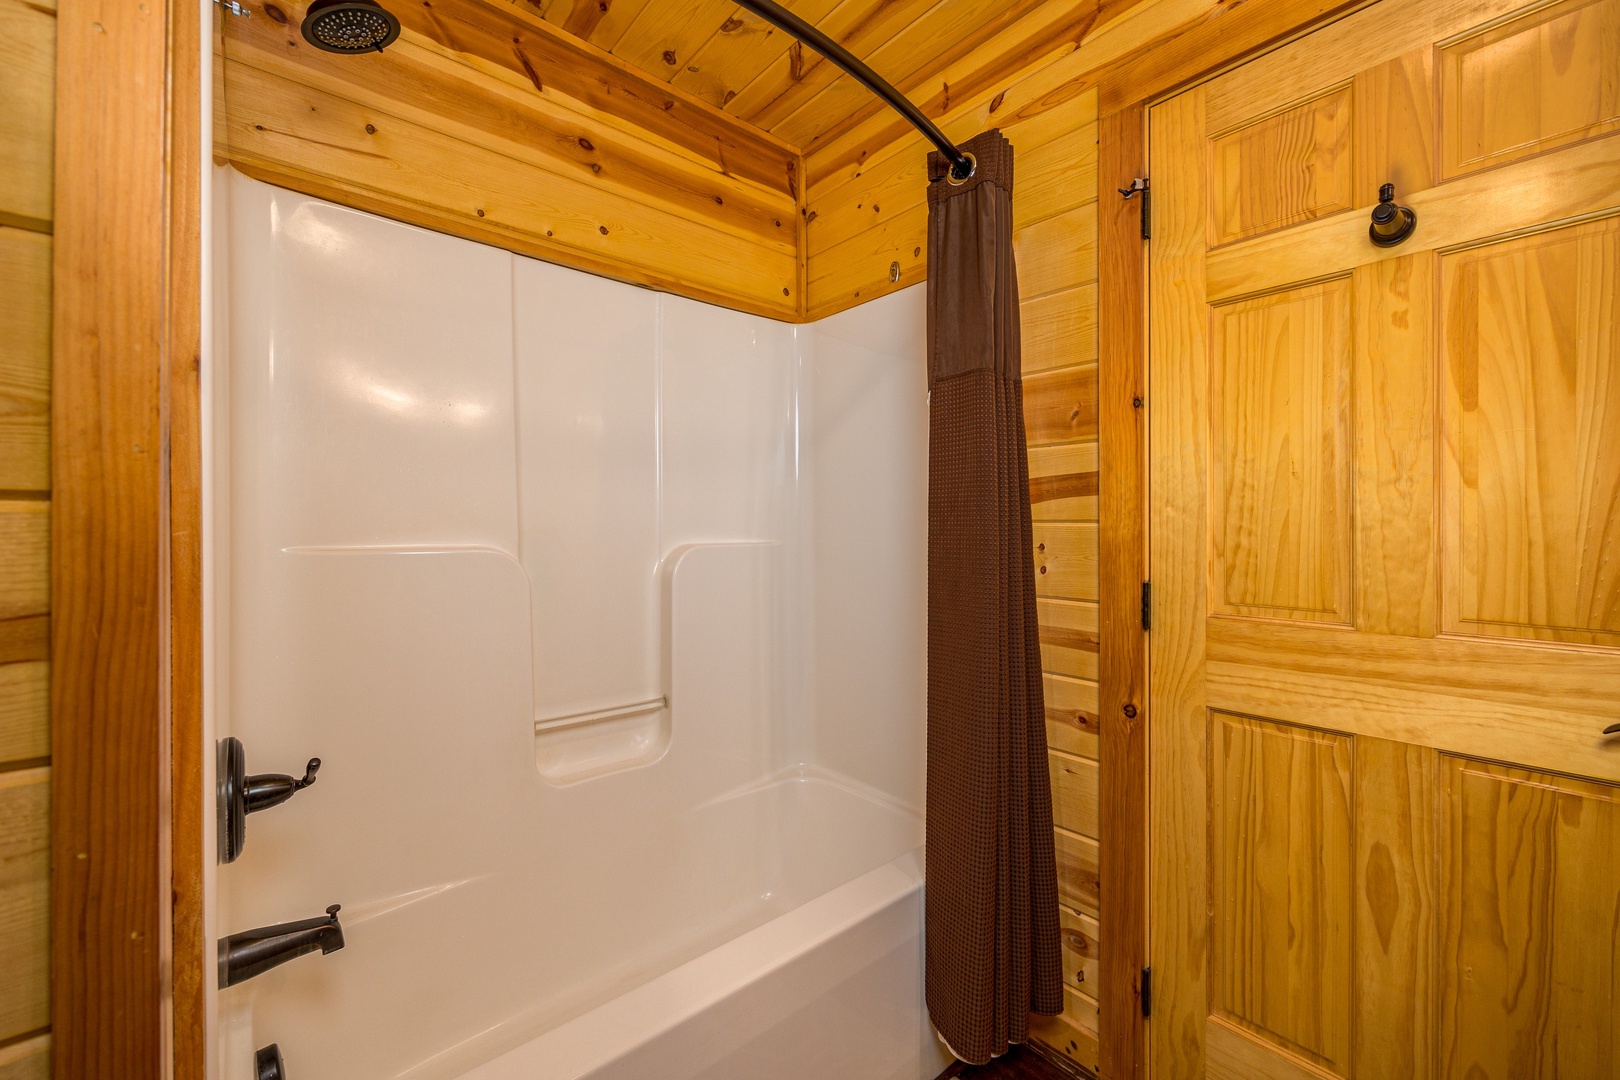 Shower at Gone To Therapy, a 2 bedroom cabin rental located in Gatlinburg